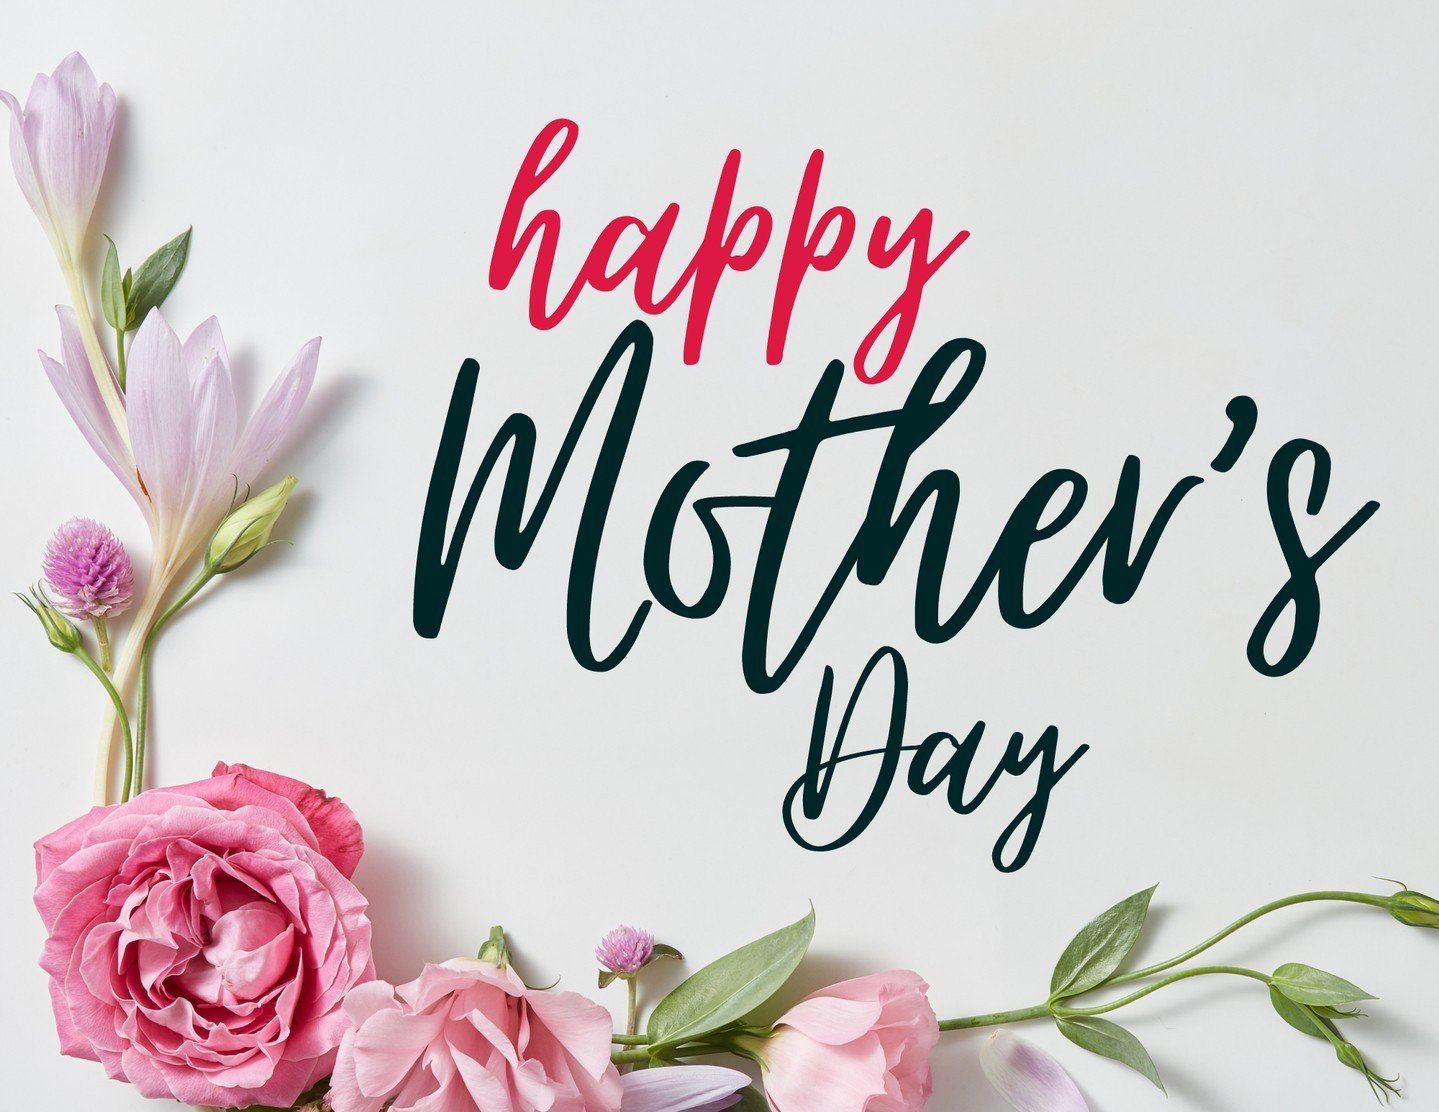 Let&rsquo;s honor &amp; cherish the mothers among us today &amp; every day. May God's blessings continue to shine upon you, guiding and uplifting you in your journey of motherhood.  Wishing all mothers a day filled with love, joy, and cherished momen